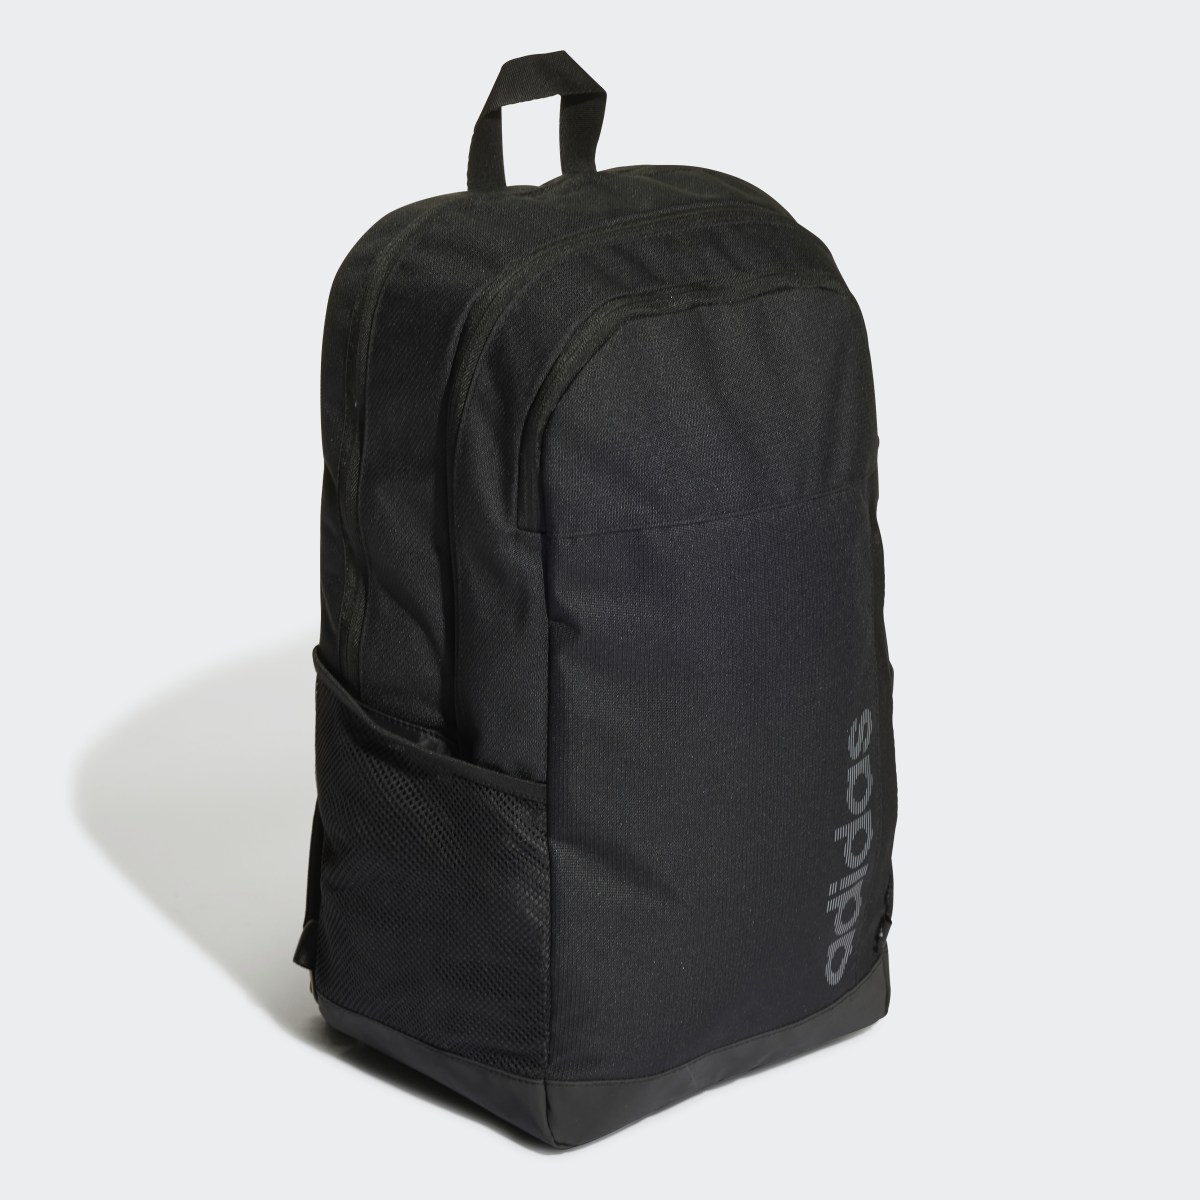 Adidas Motion Linear Backpack. 4